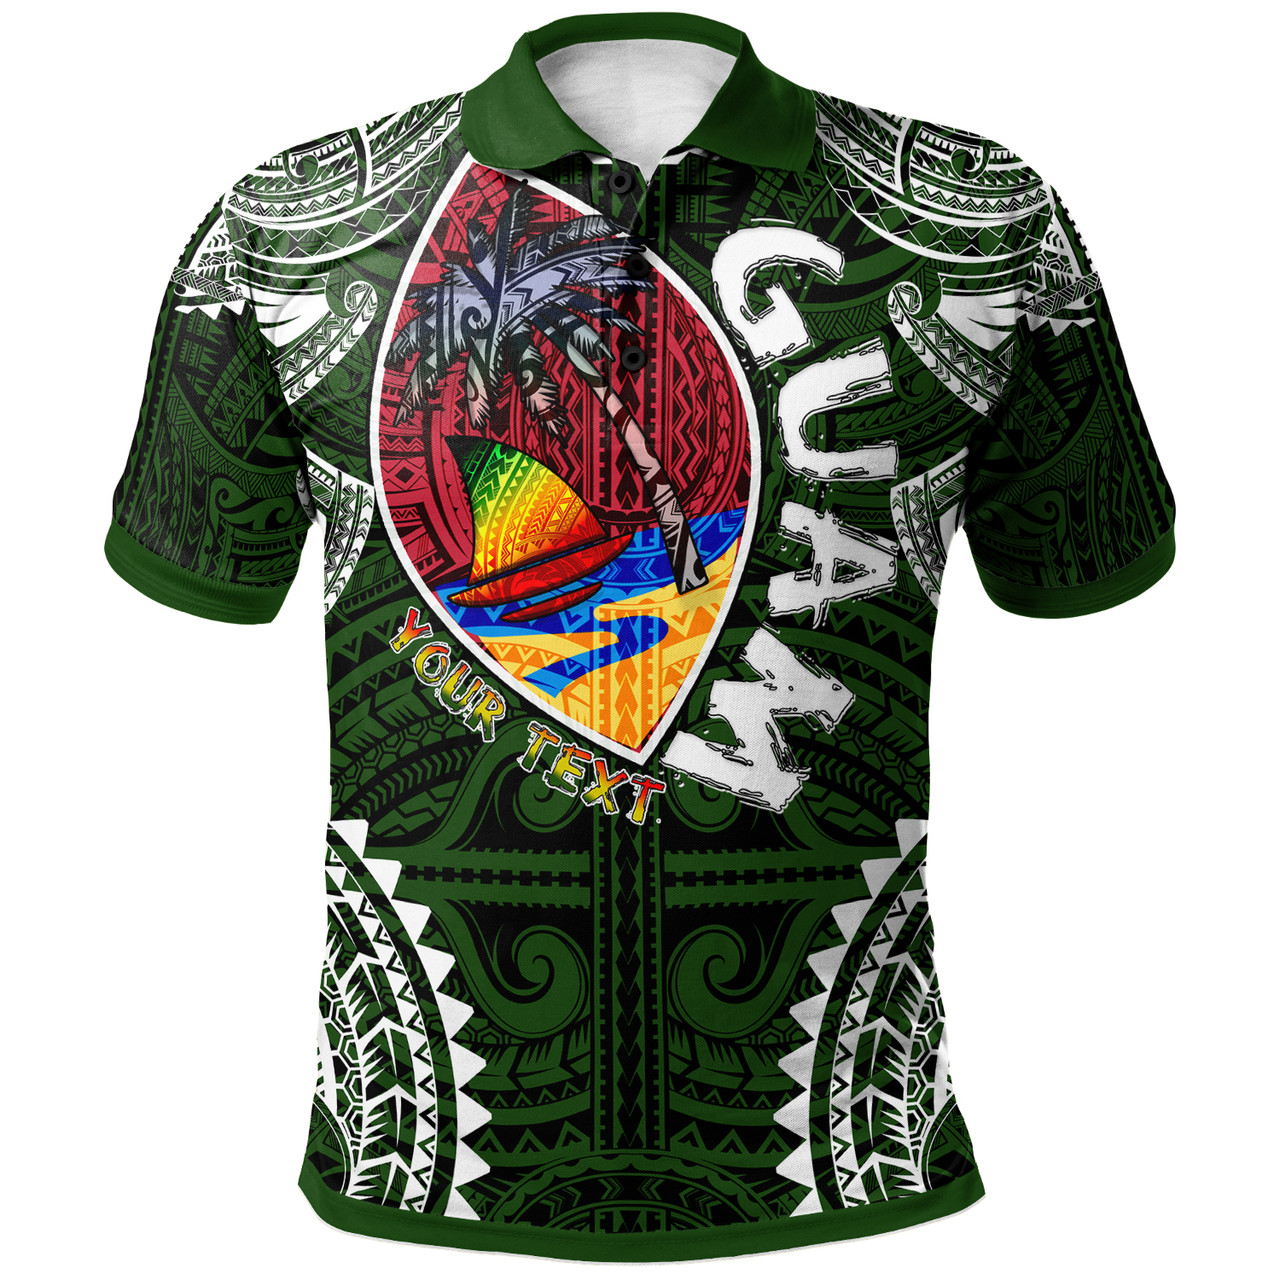 Guam Polol Shirt- Custom Guam Independence Day '' Wish You A Very Happy Independence Day '' With Polynesian Patterns